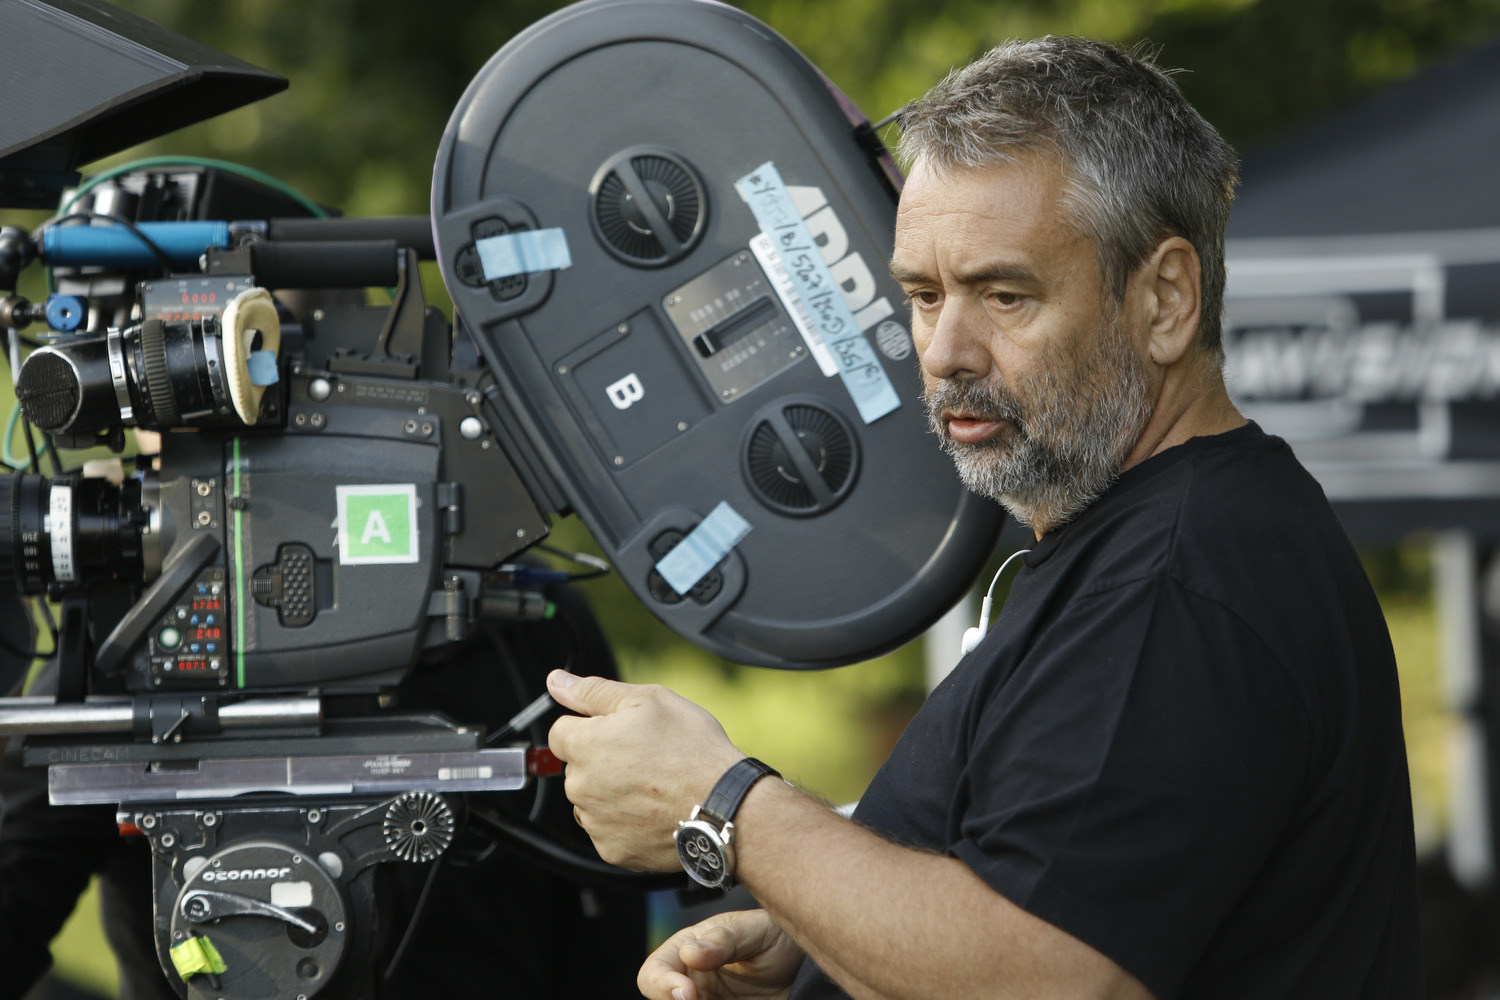 Luc Besson : The Family (2013) Behind the Scenes